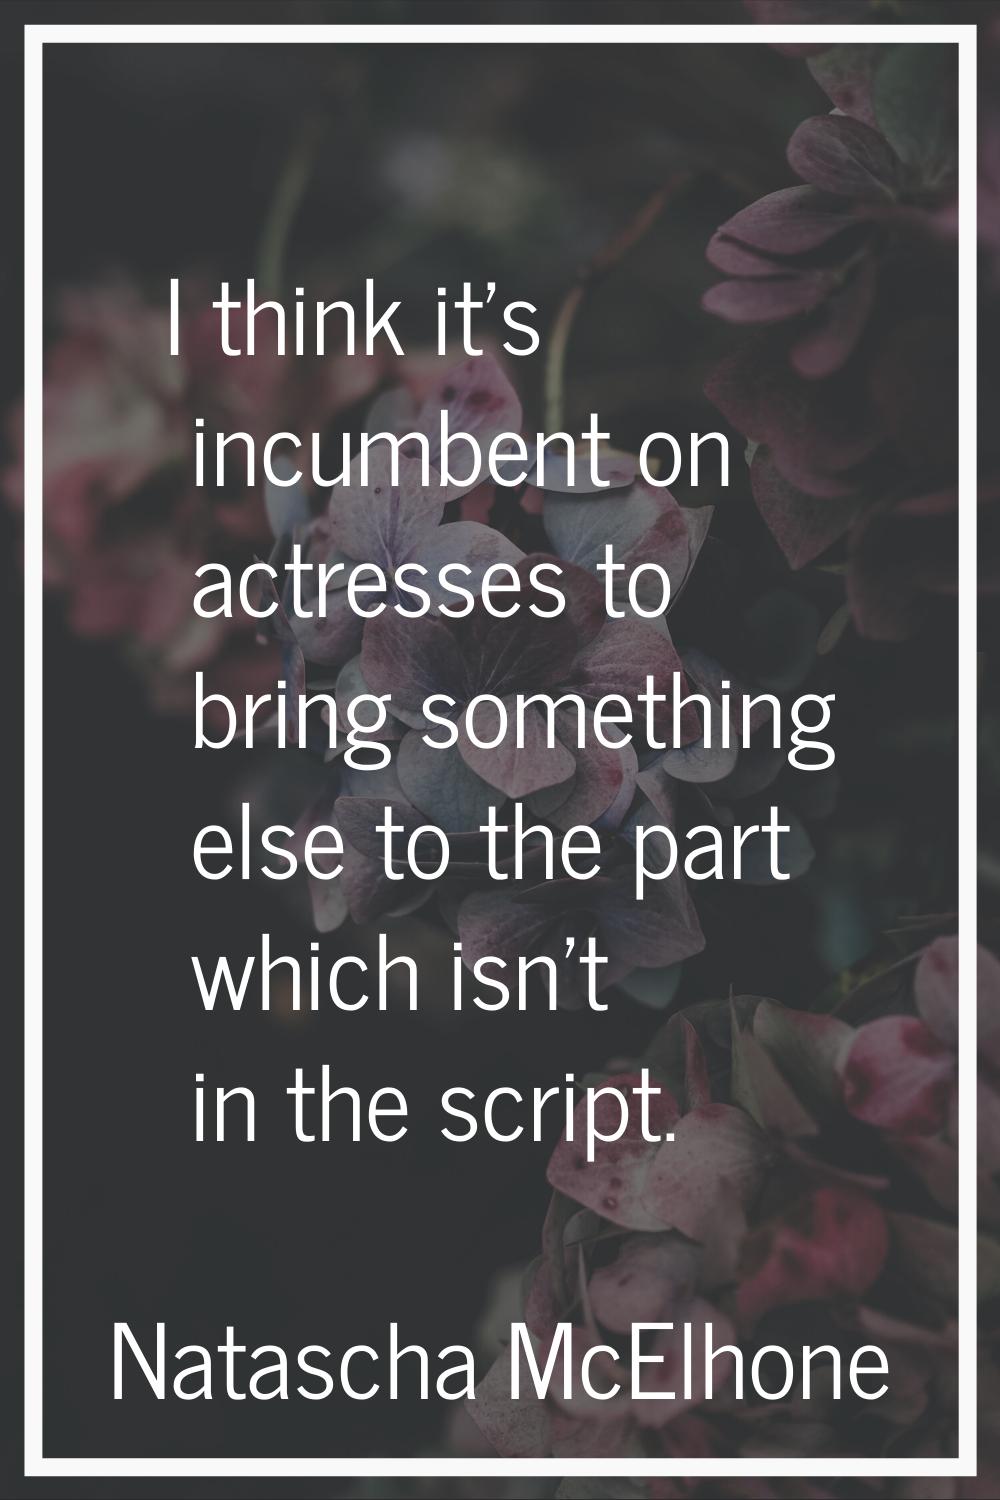 I think it's incumbent on actresses to bring something else to the part which isn't in the script.